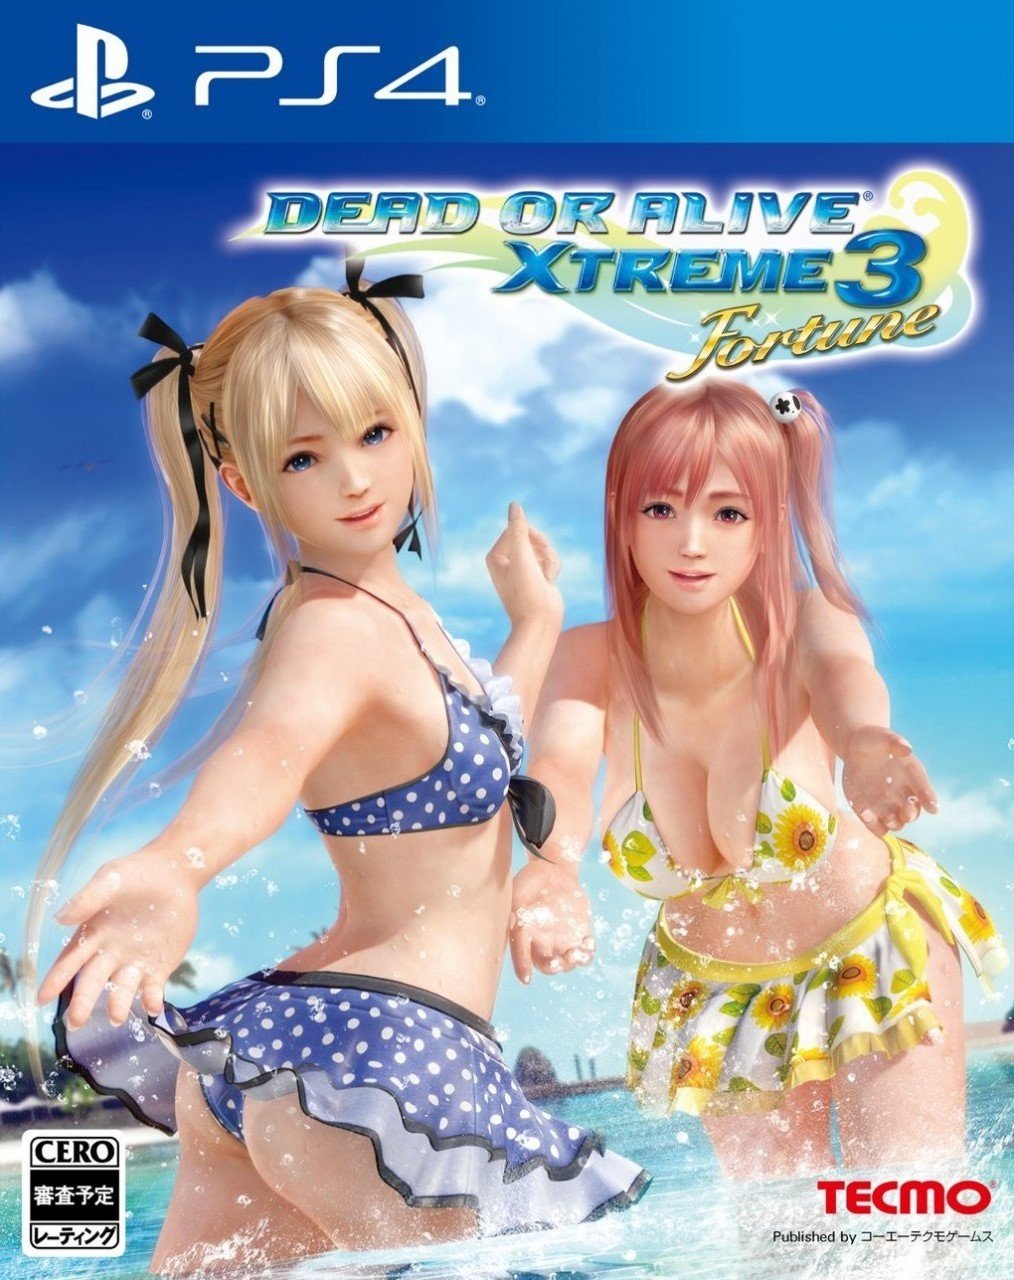 Image of Dead or Alive Xtreme 3: Fortune